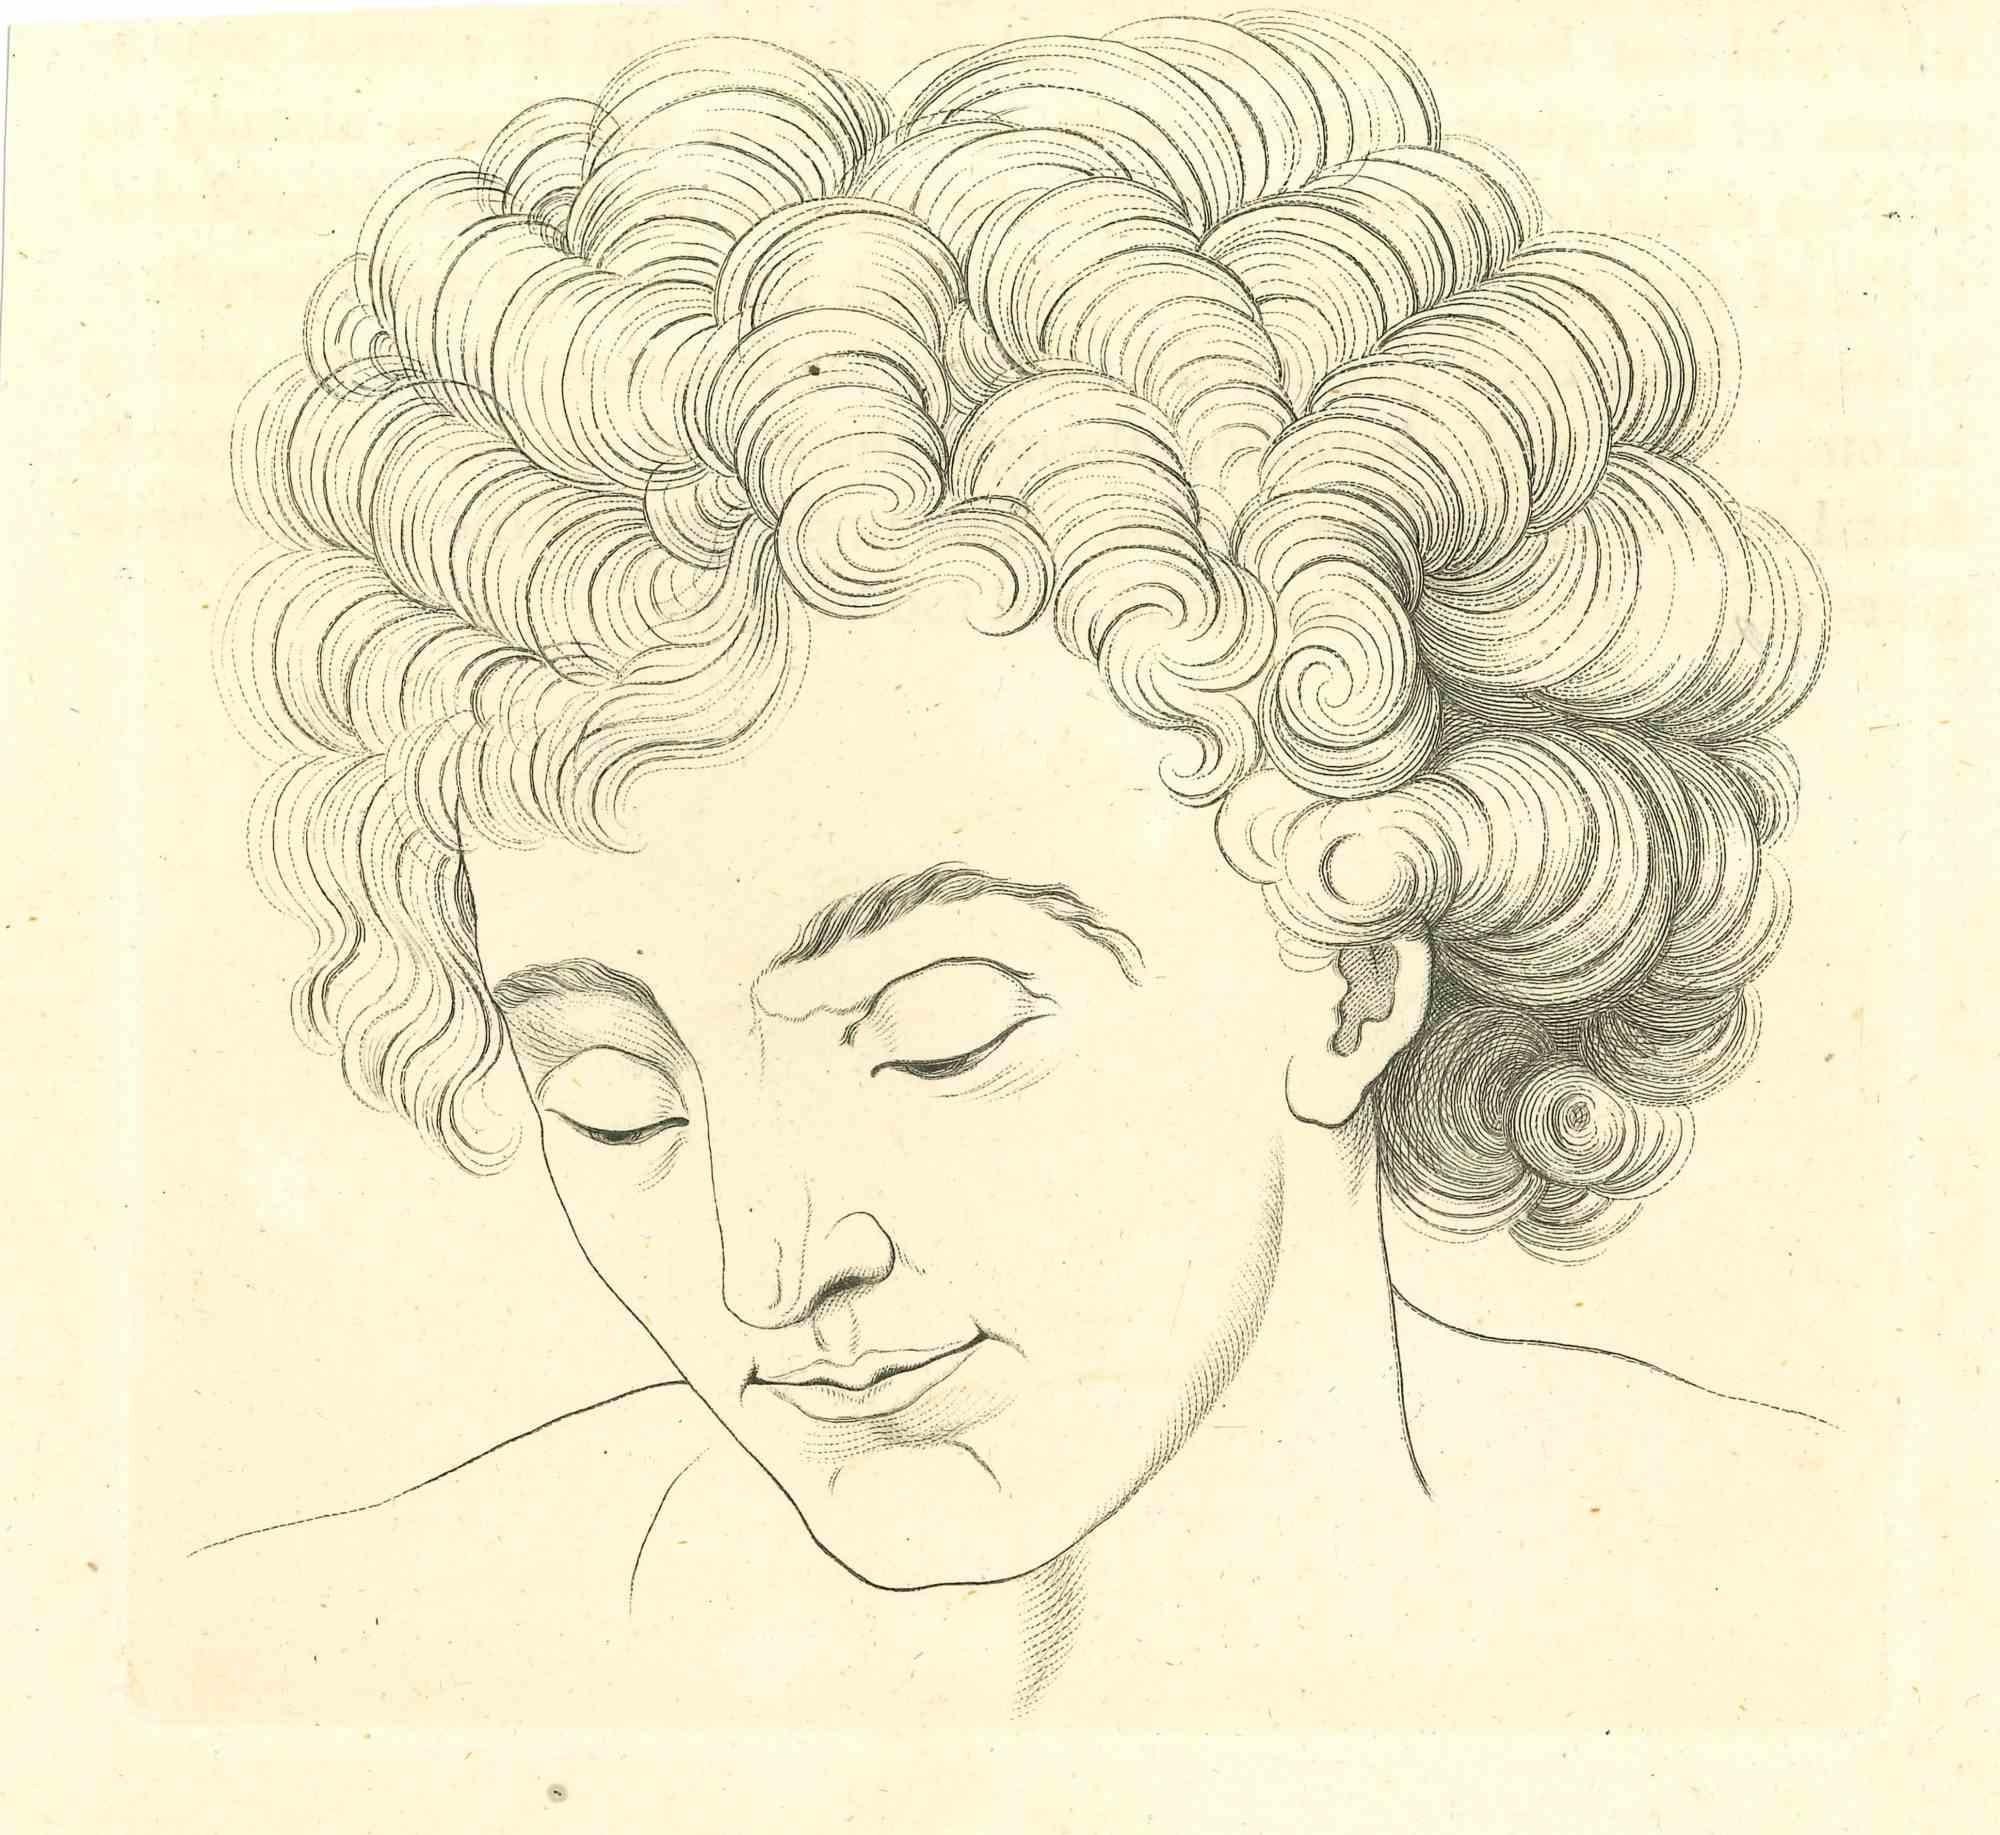 Portrait is an original etching artwork realized by Thomas Holloway for Johann Caspar Lavater's "Essays on Physiognomy, Designed to Promote the Knowledge and the Love of Mankind", London, Bensley, 1810. 

With the script on the rear.

Good